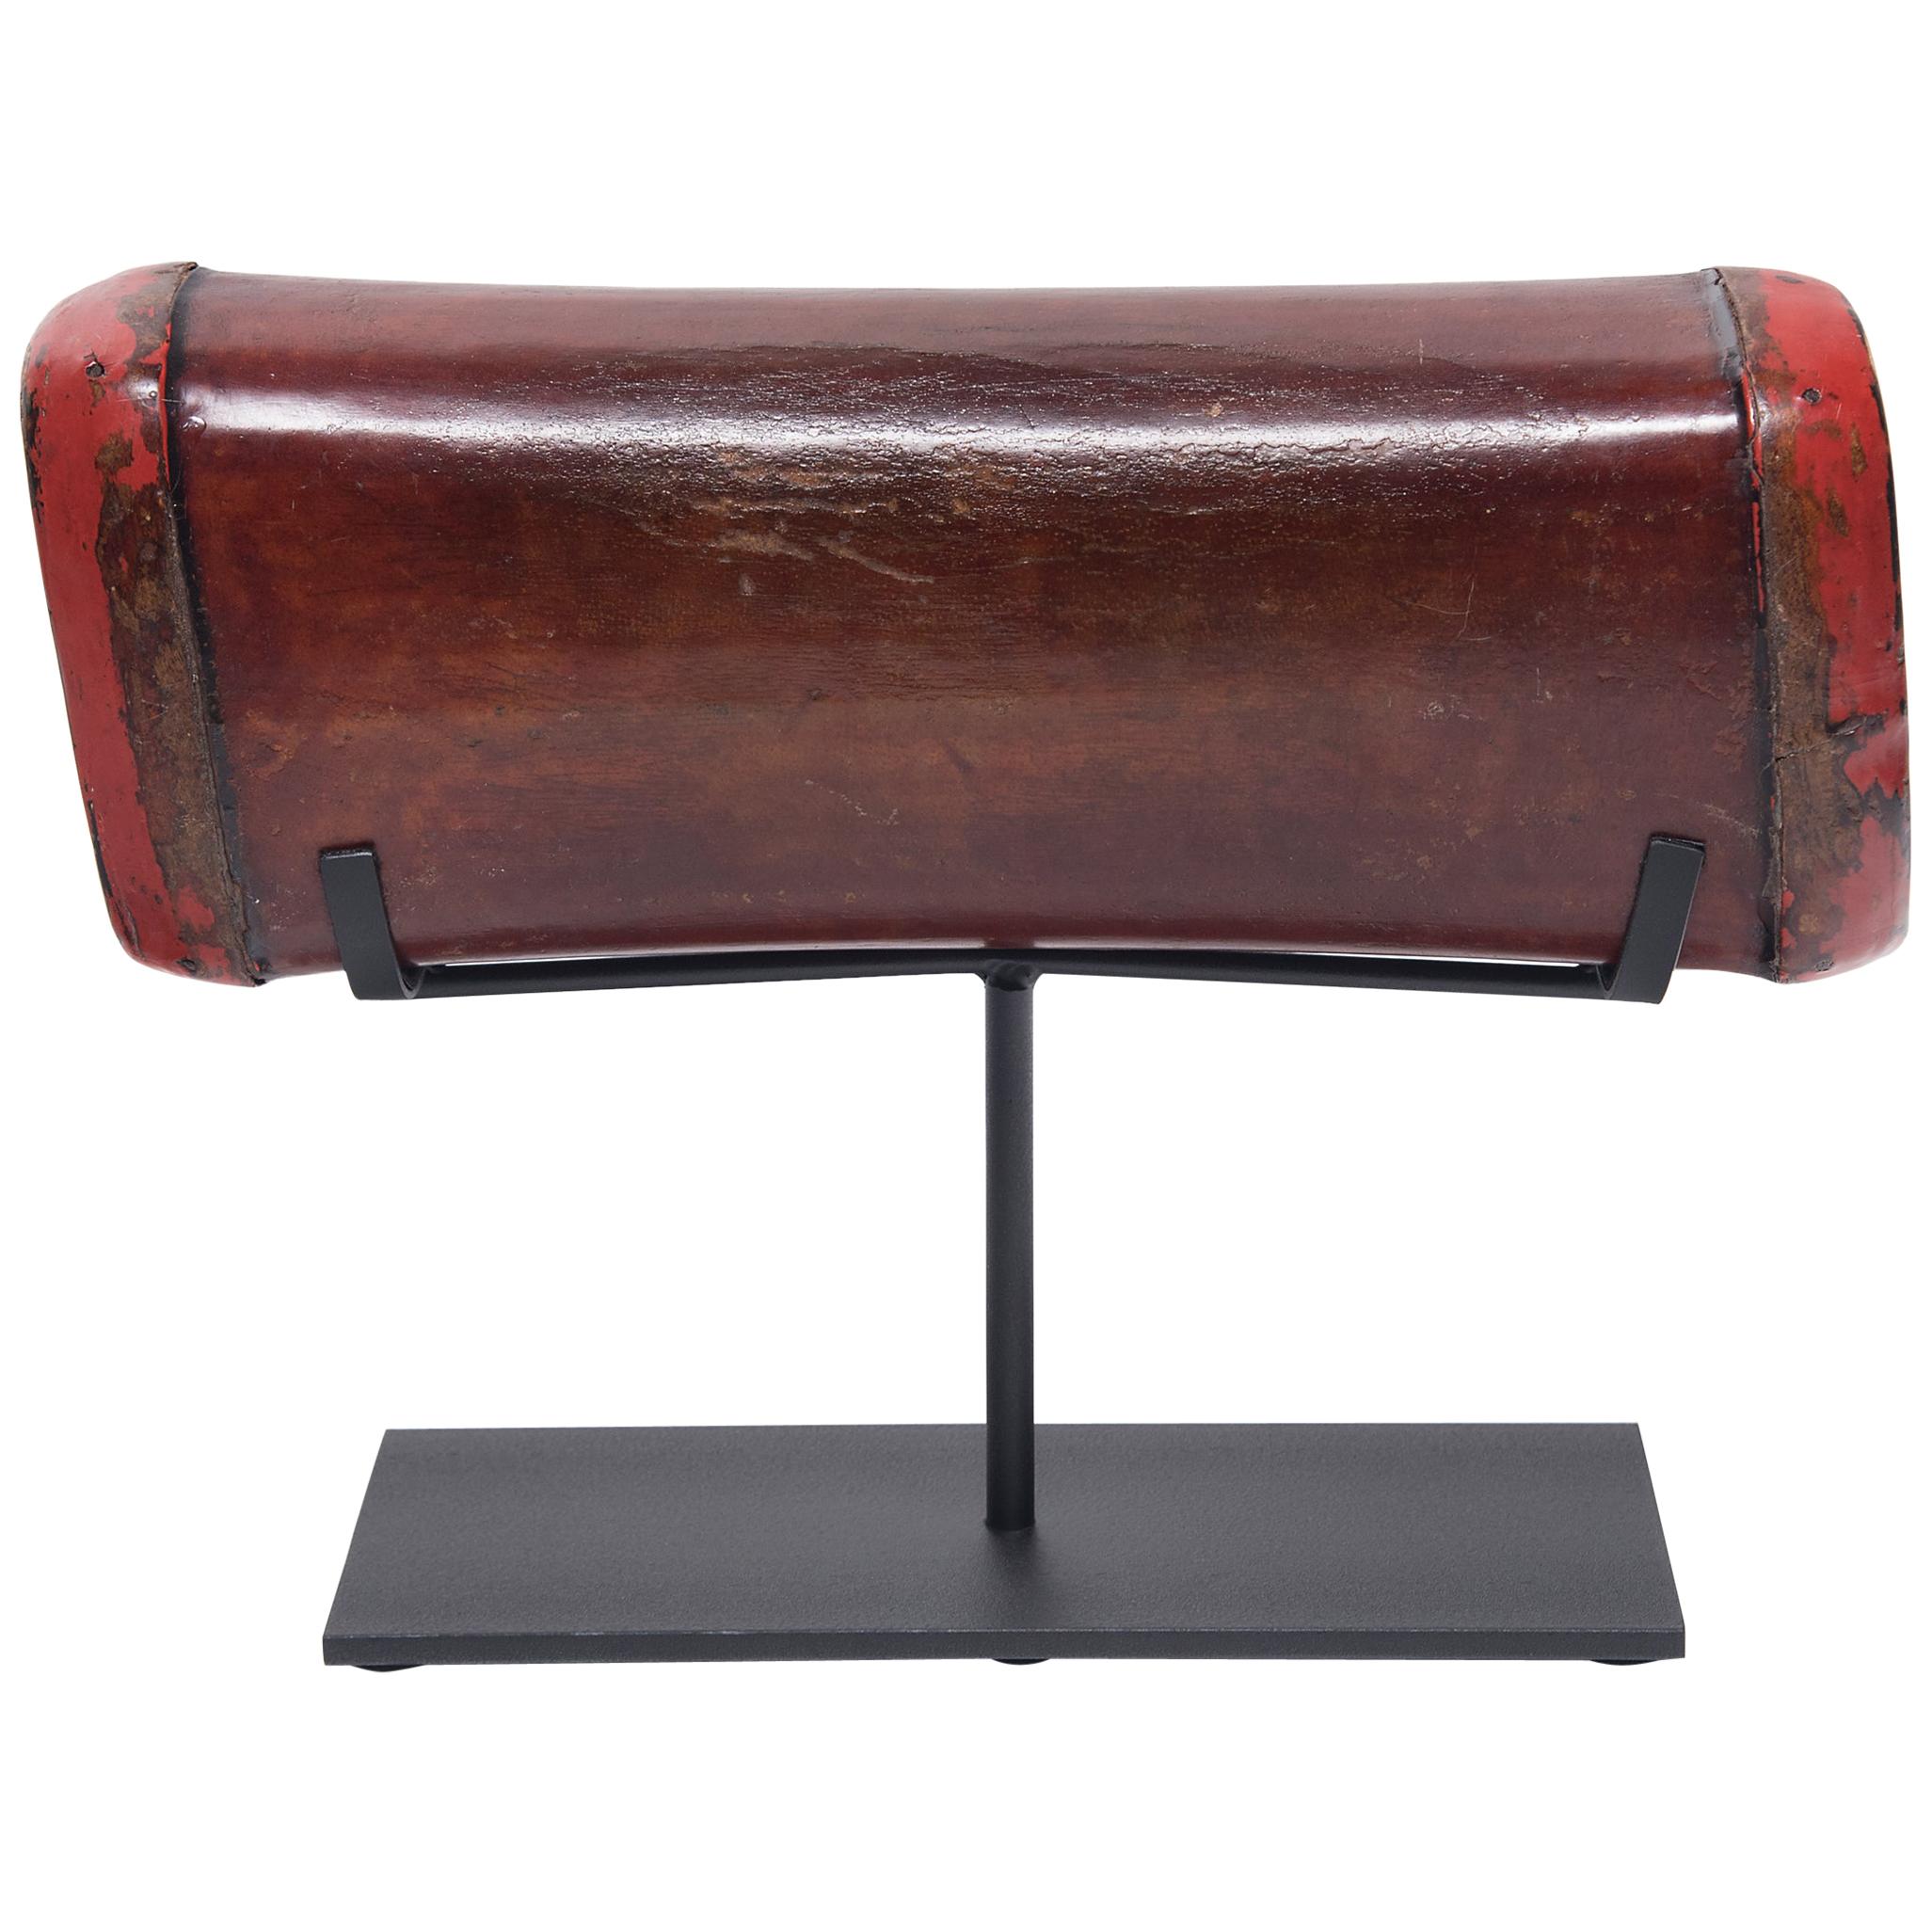 Chinese Red Lacquer Hide Headrest, circa 1850